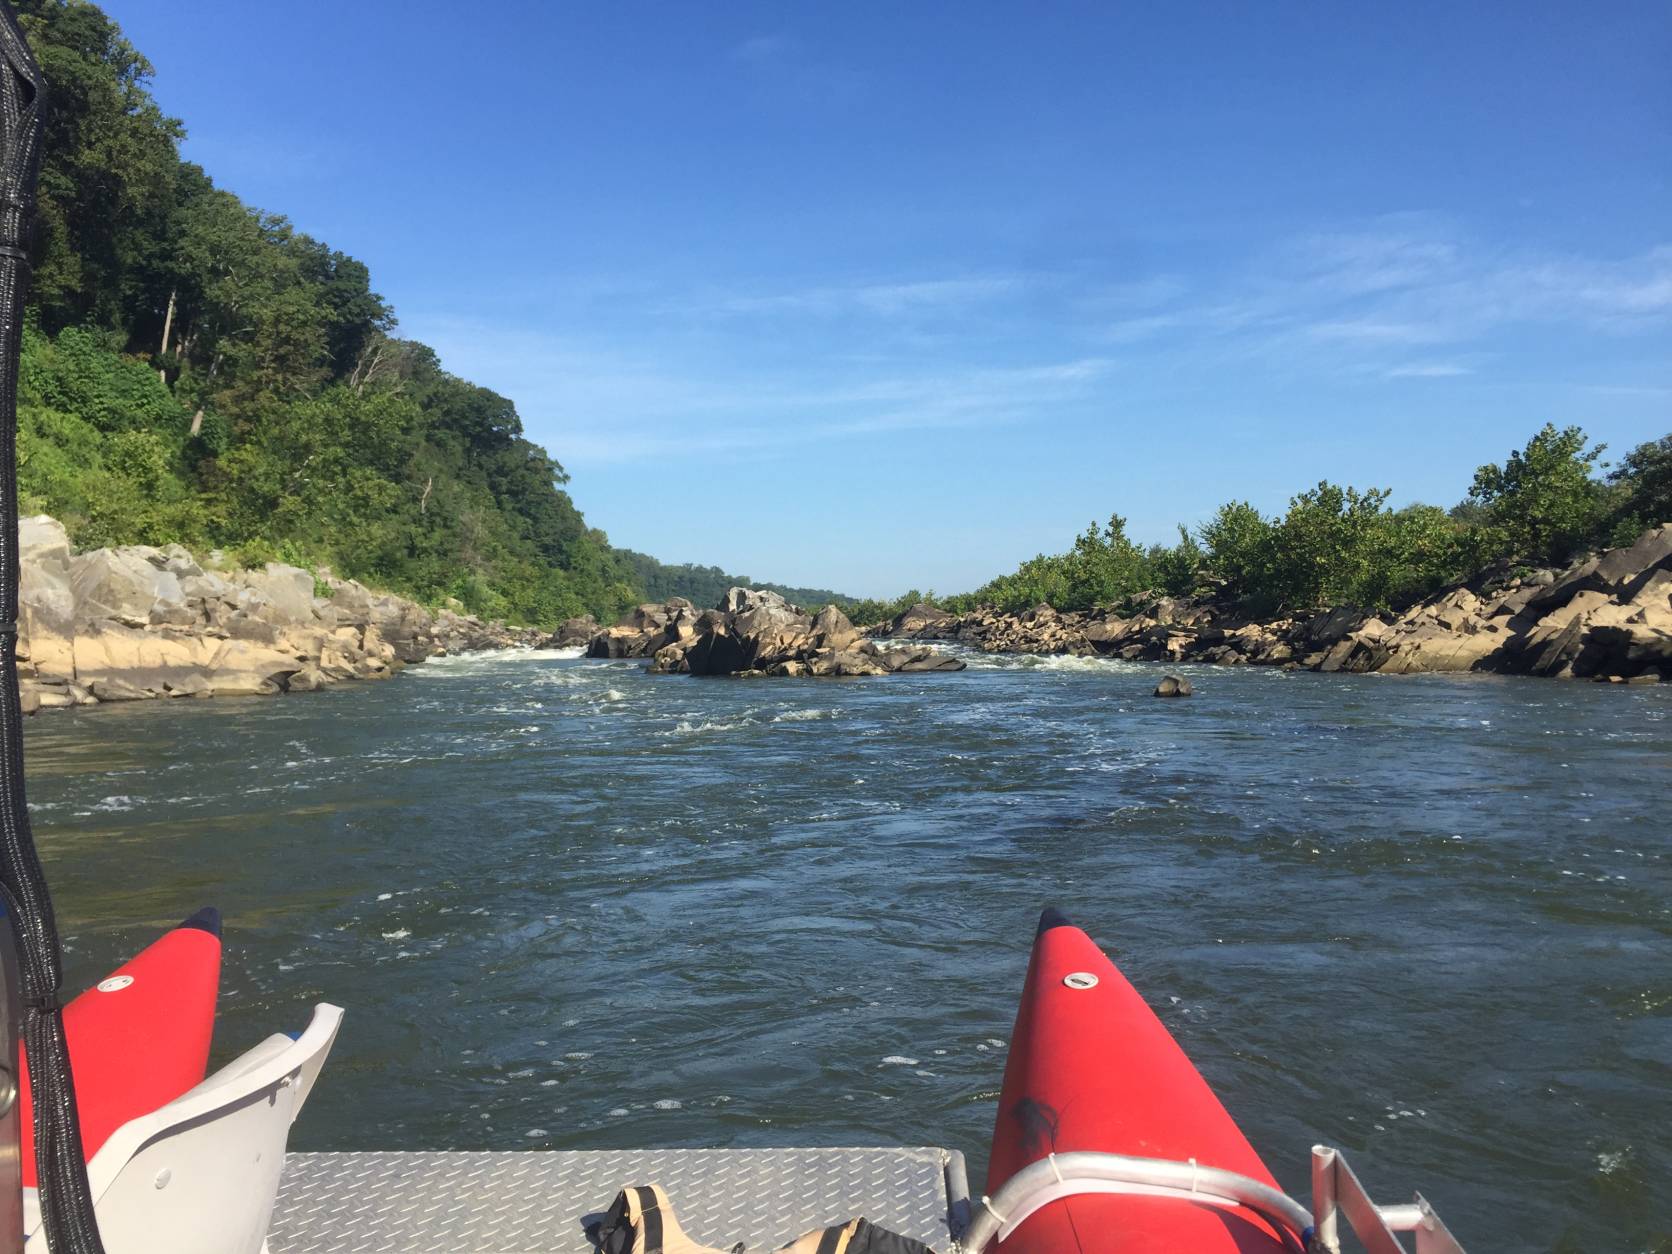 Looking upstream six miles east of Great Falls at the fall line near Fletcher's Cove. (Courtesy of Chesapeake Conservancy/Terrain360)